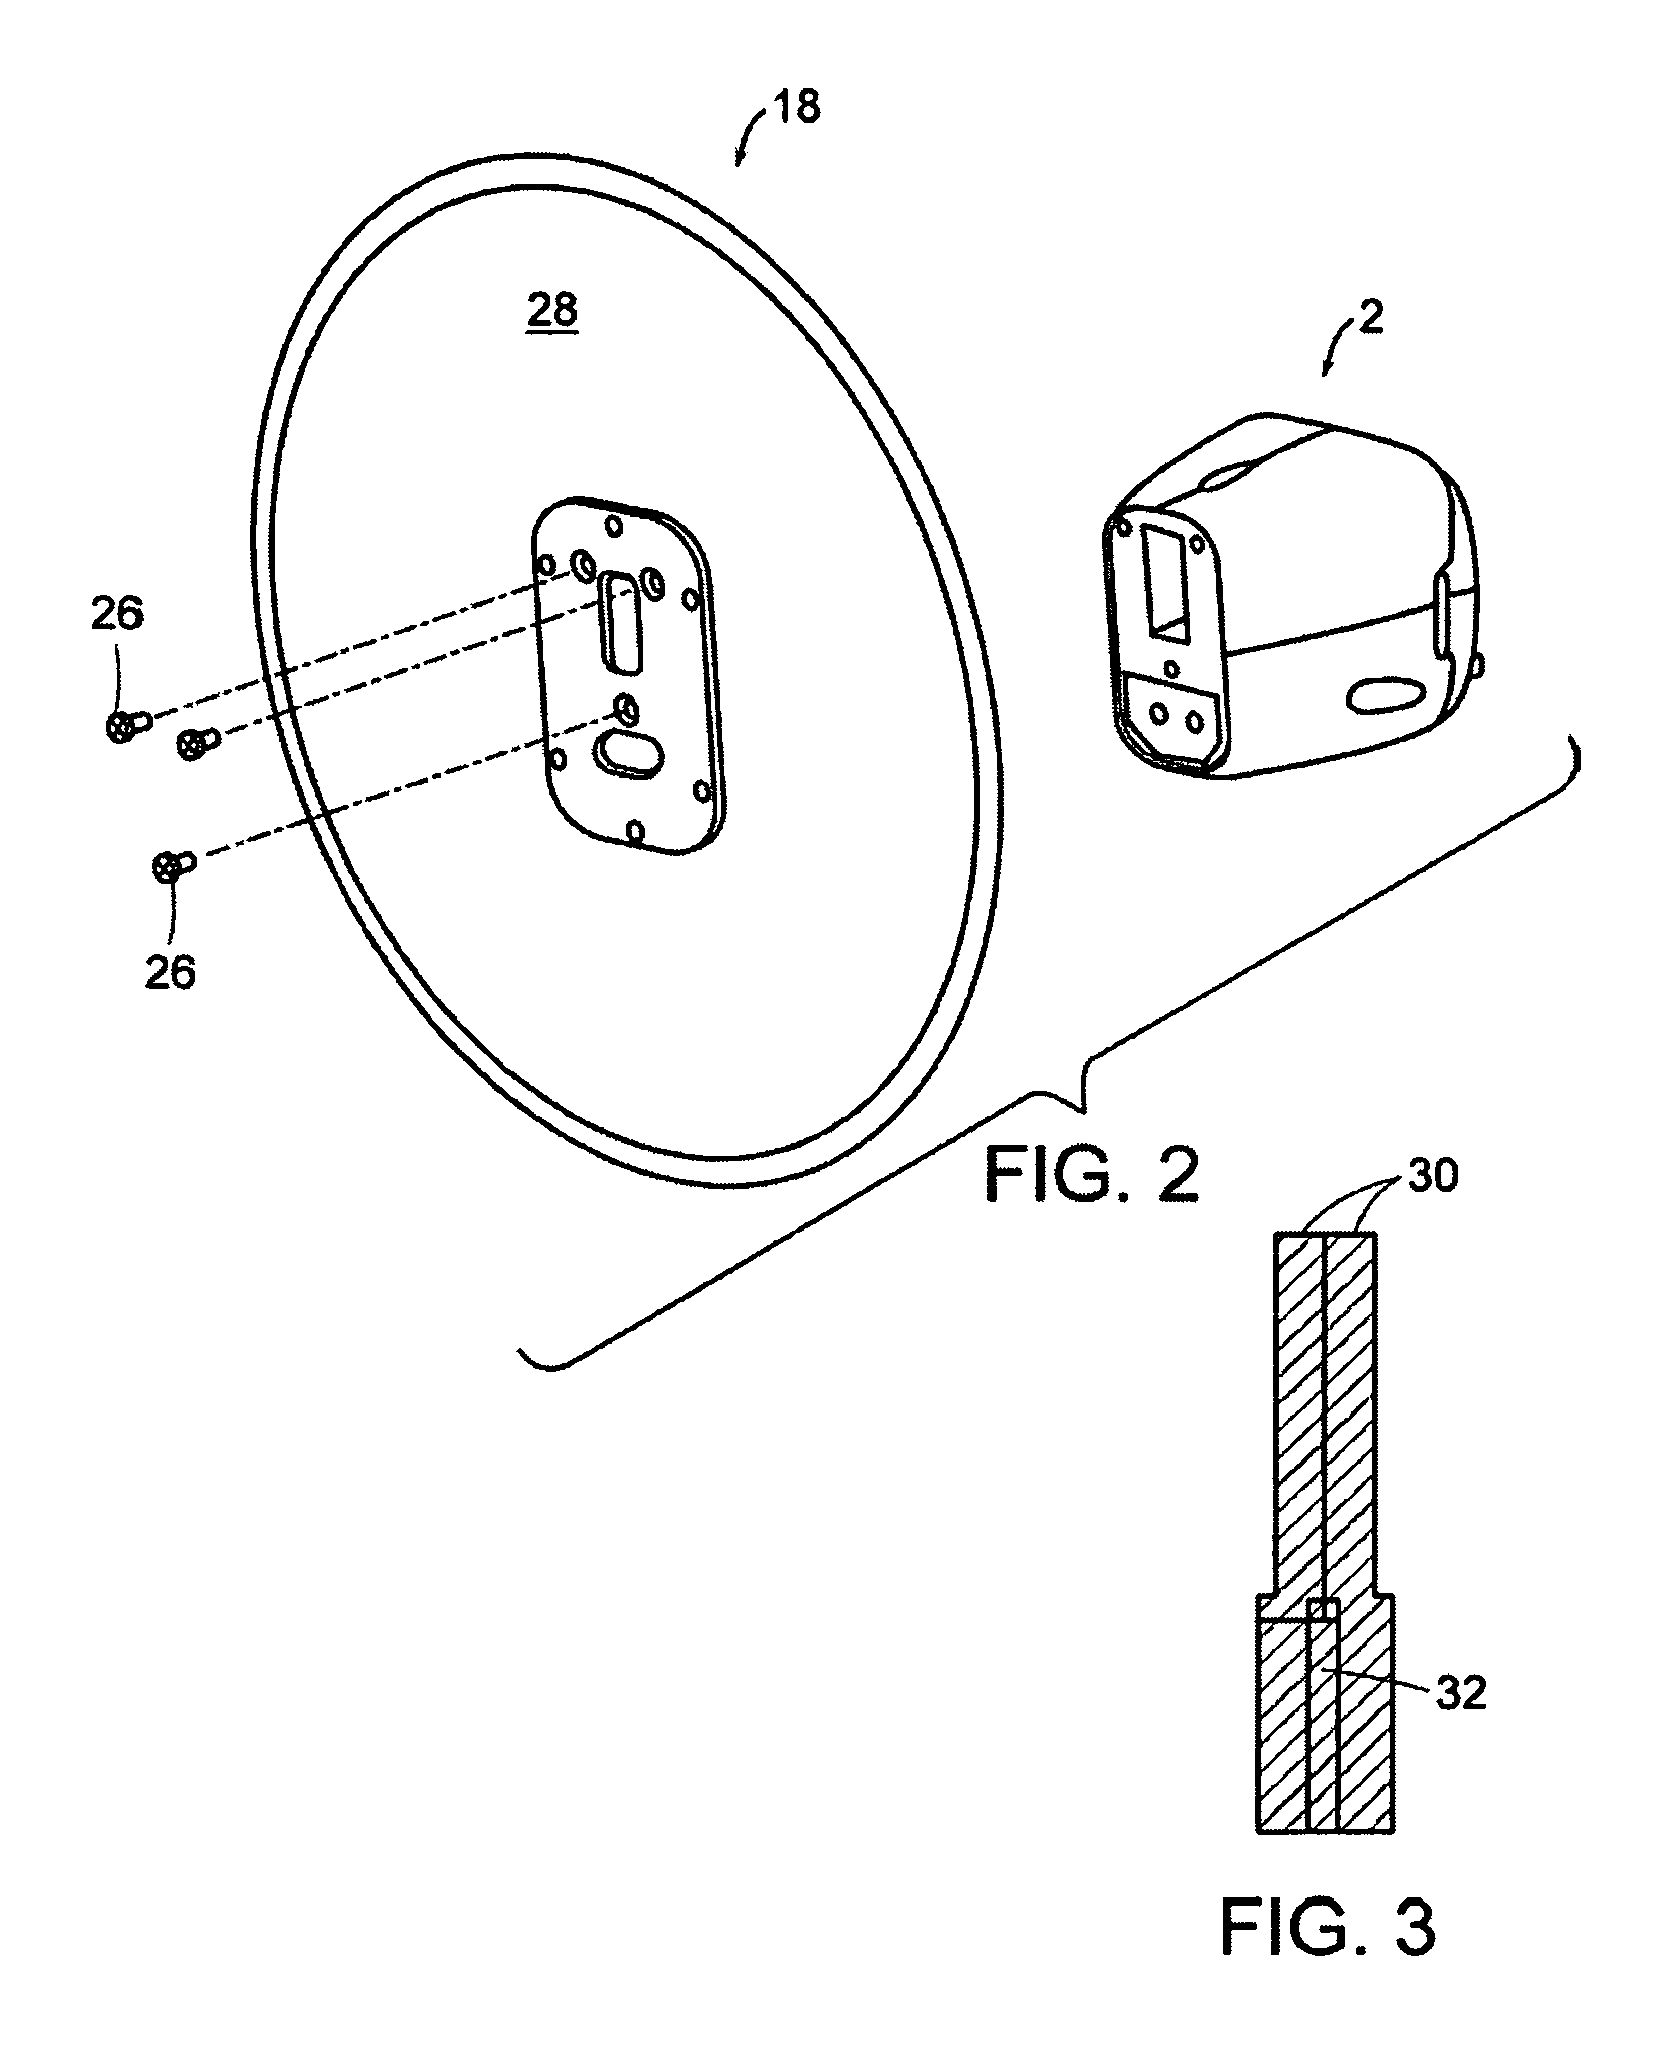 Radiation shield for portable x-ray fluorescence instruments